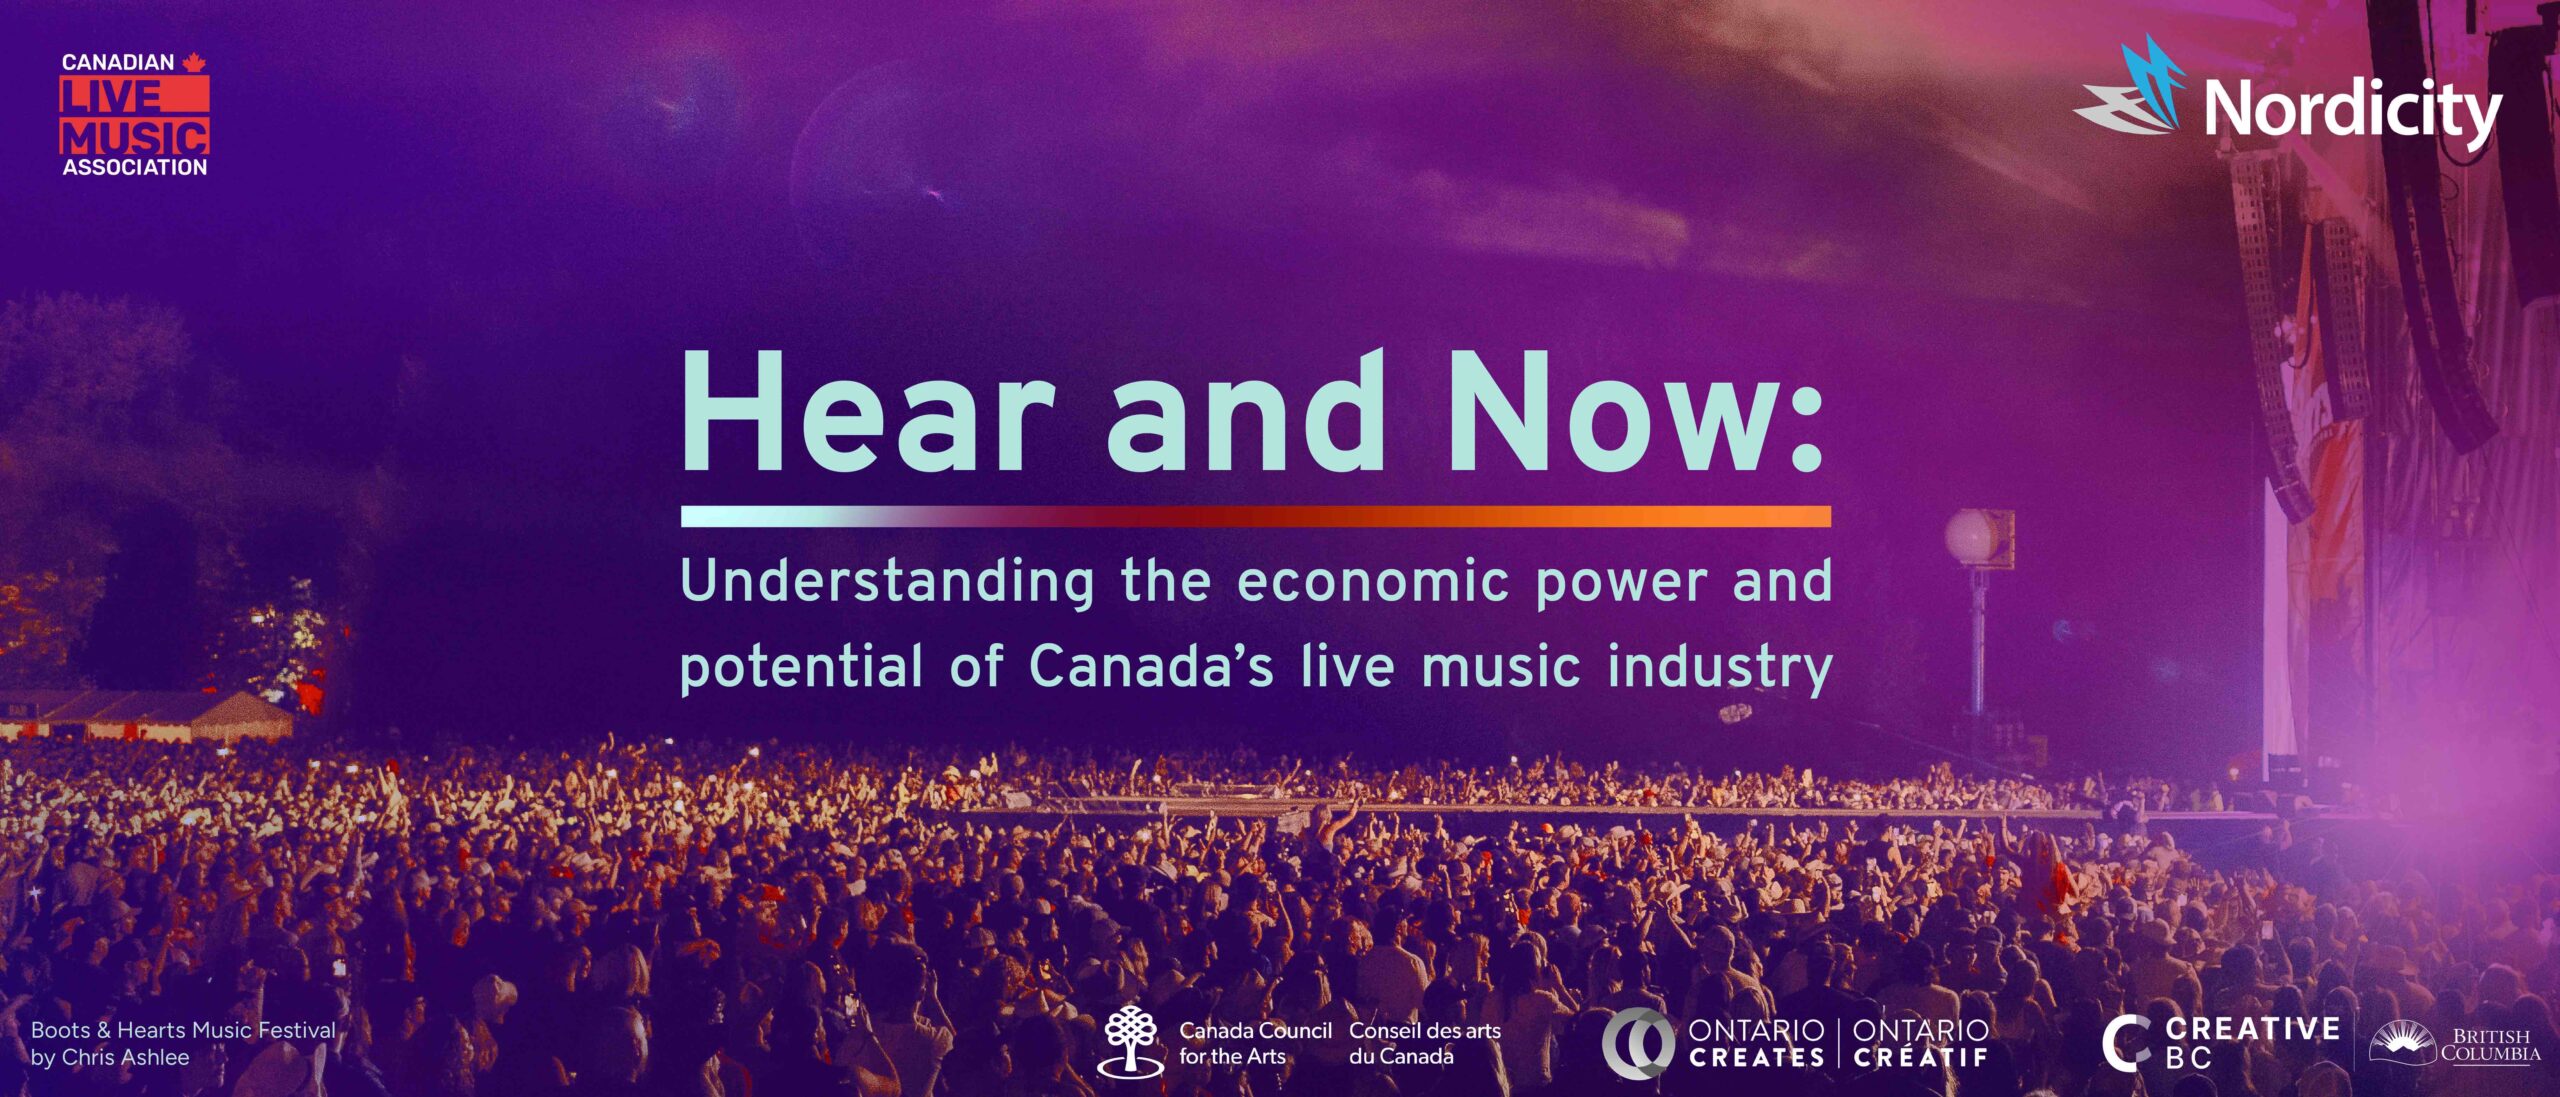 HAVE YOUR SAY – Hear and Now: Understanding the economic power and potential of Canada’s live music industry